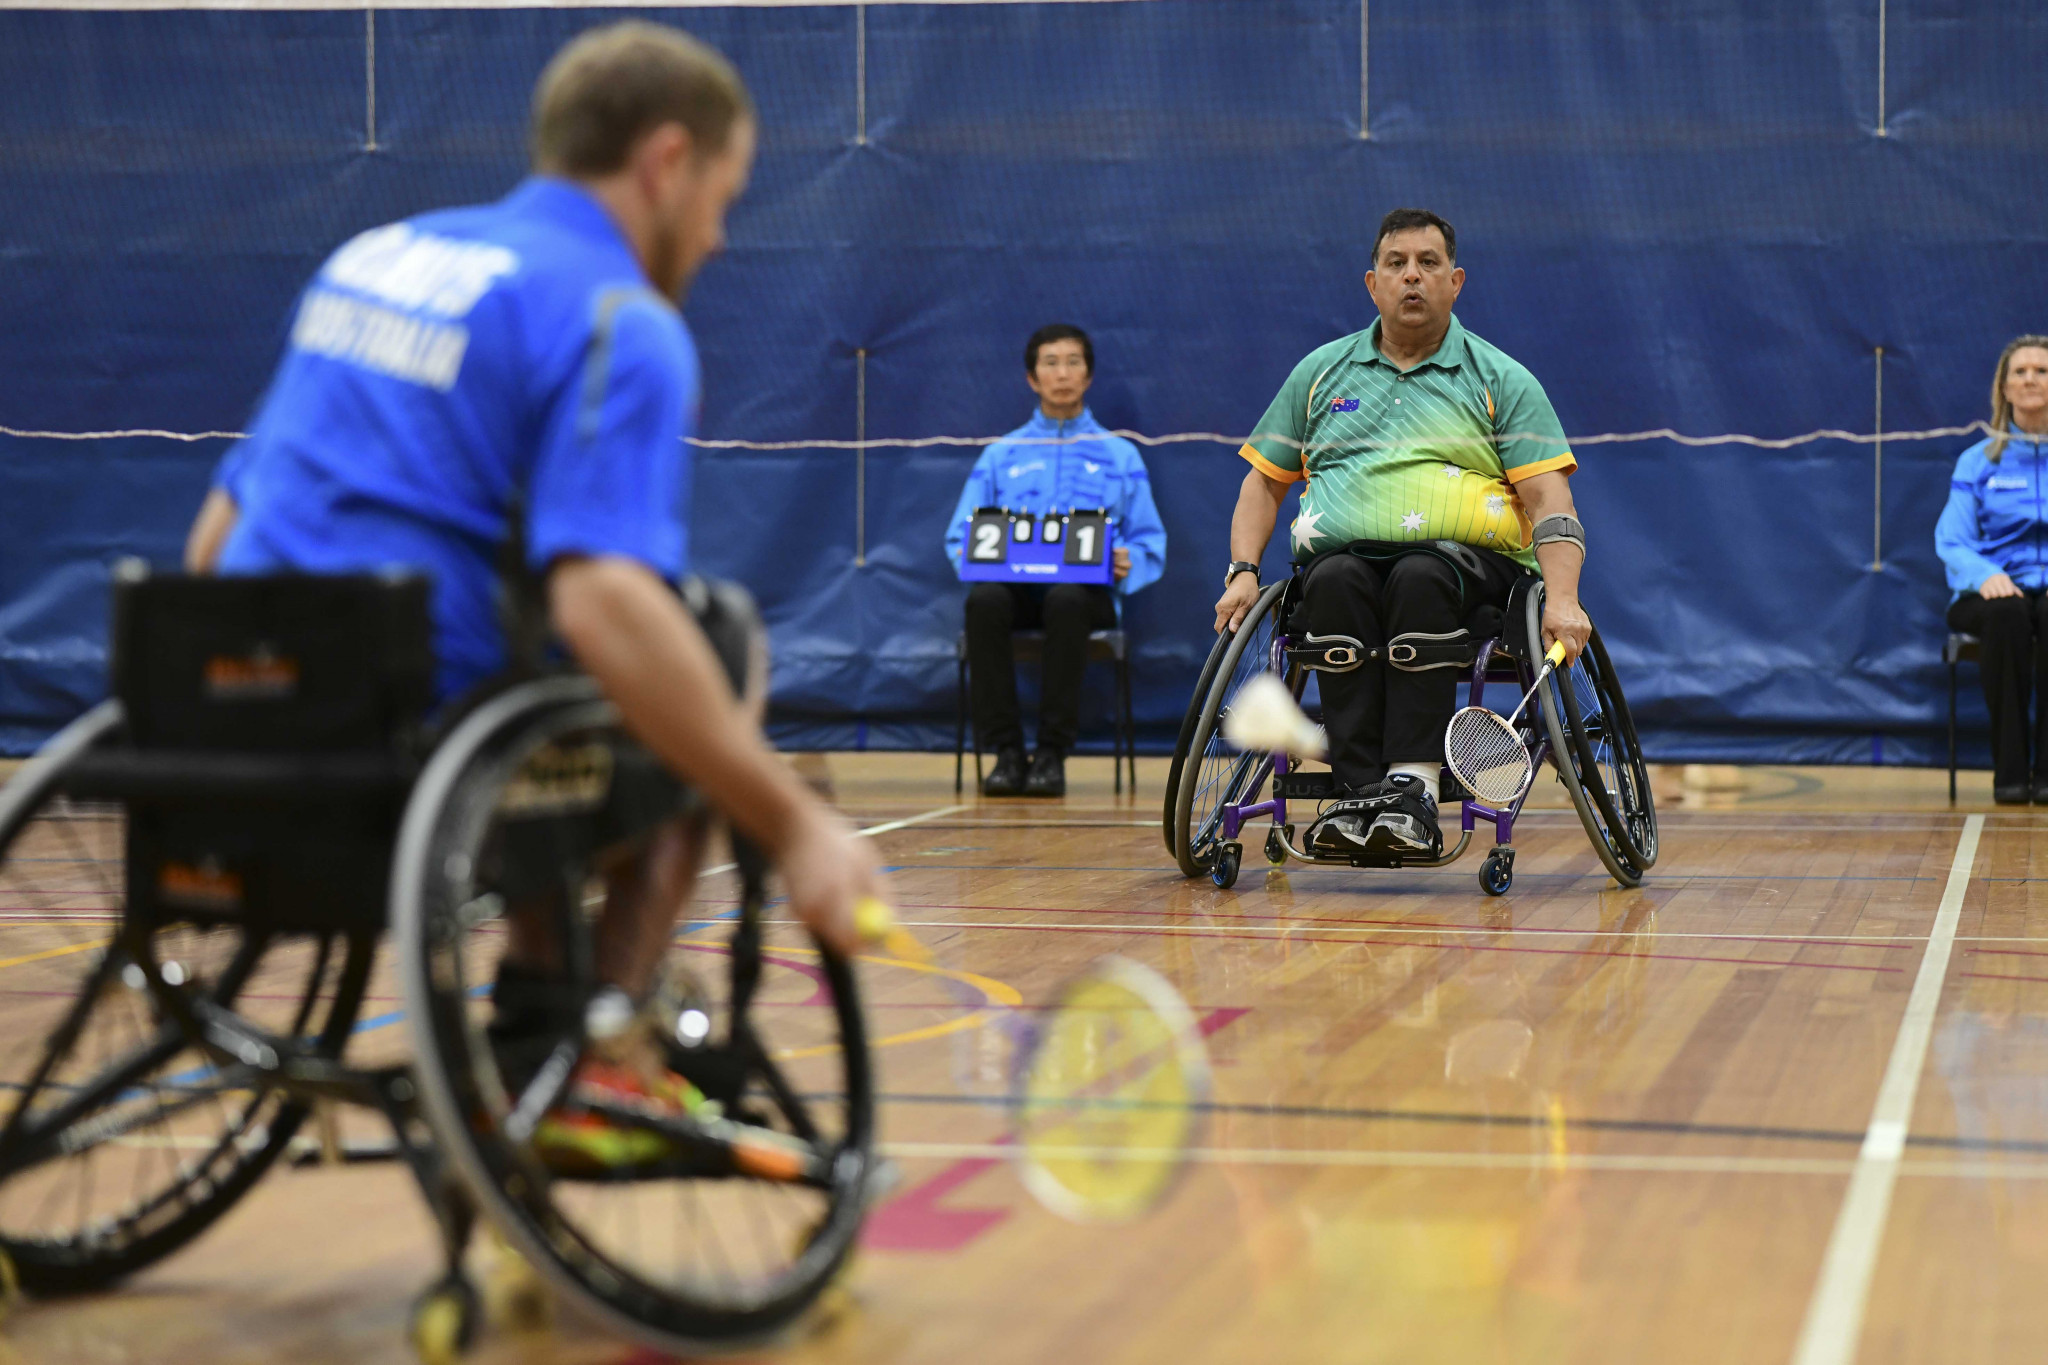 Australia's Richard Davis leads the way for the host nation at the Championships ©Oceania Para-Badminton